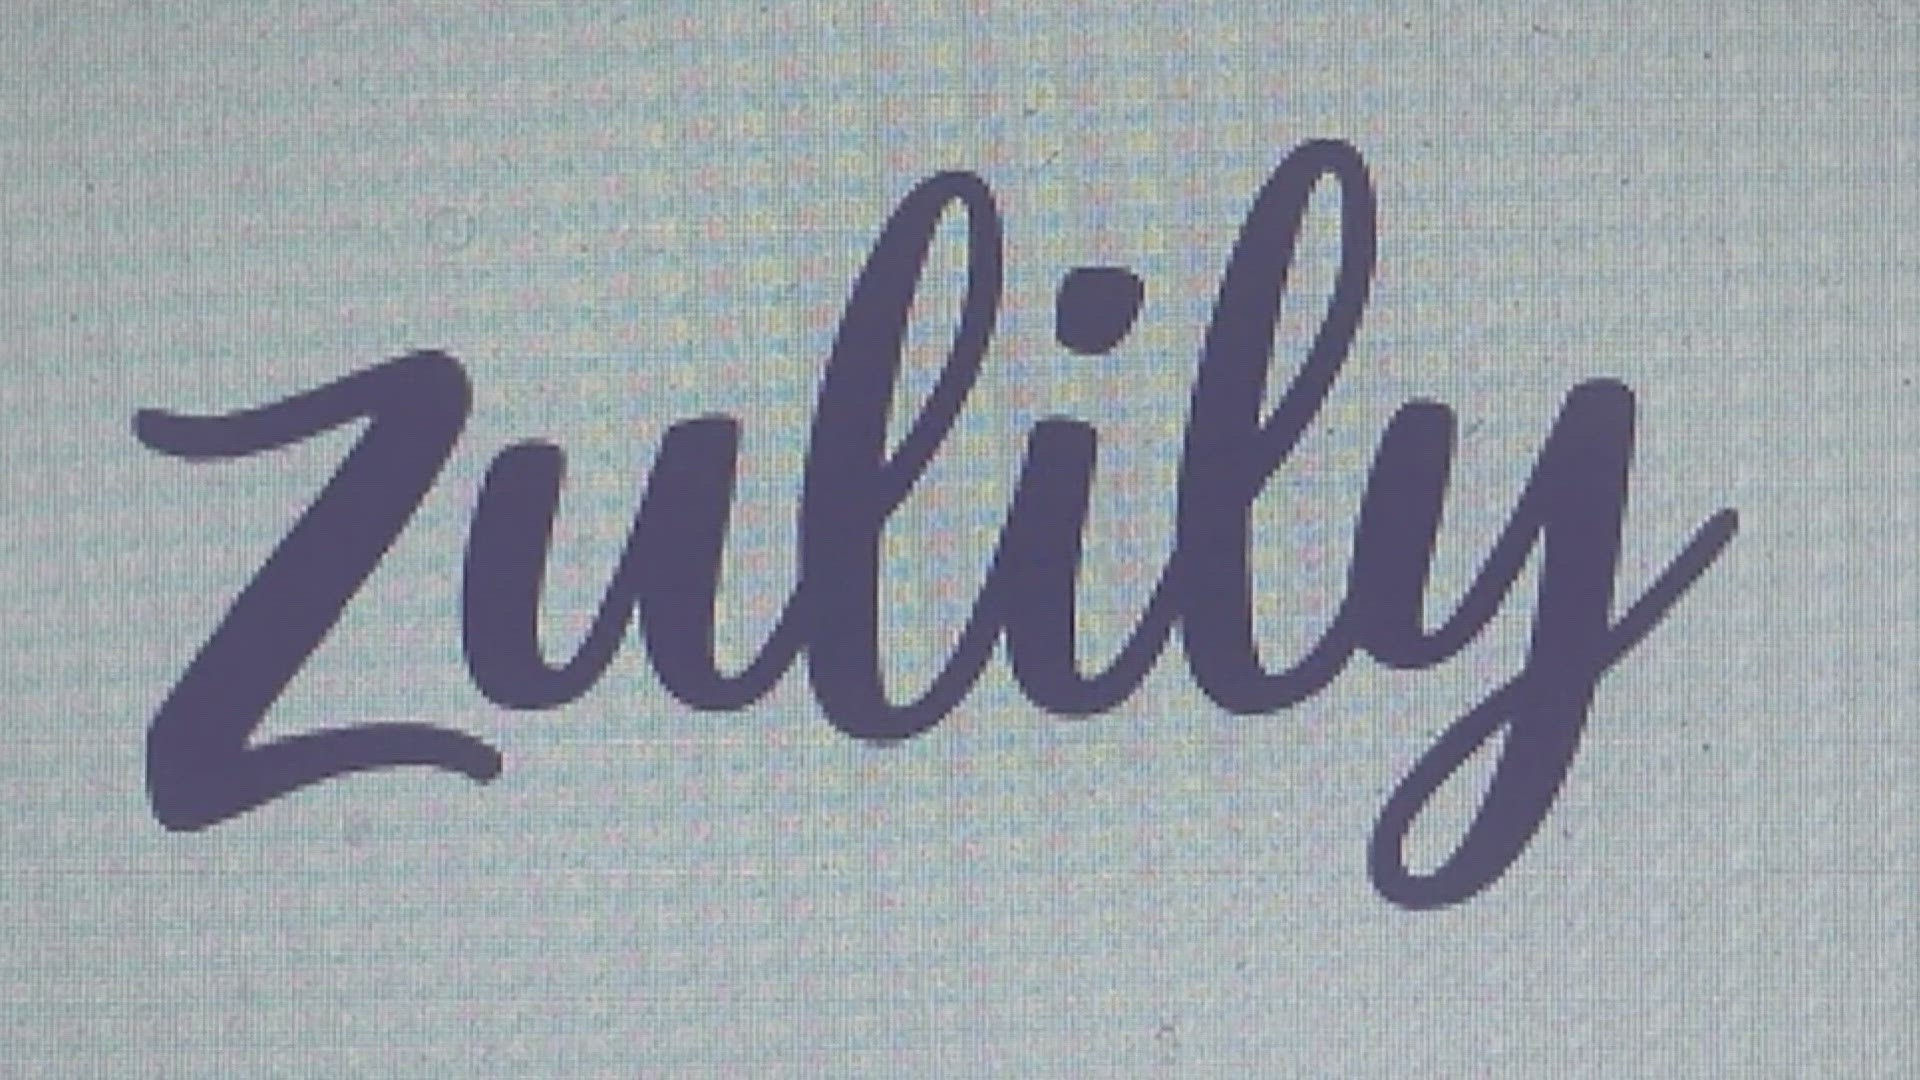 In closing down to maximize payments to its creditors, Zulily said it was seeking an “orderly wind down.”